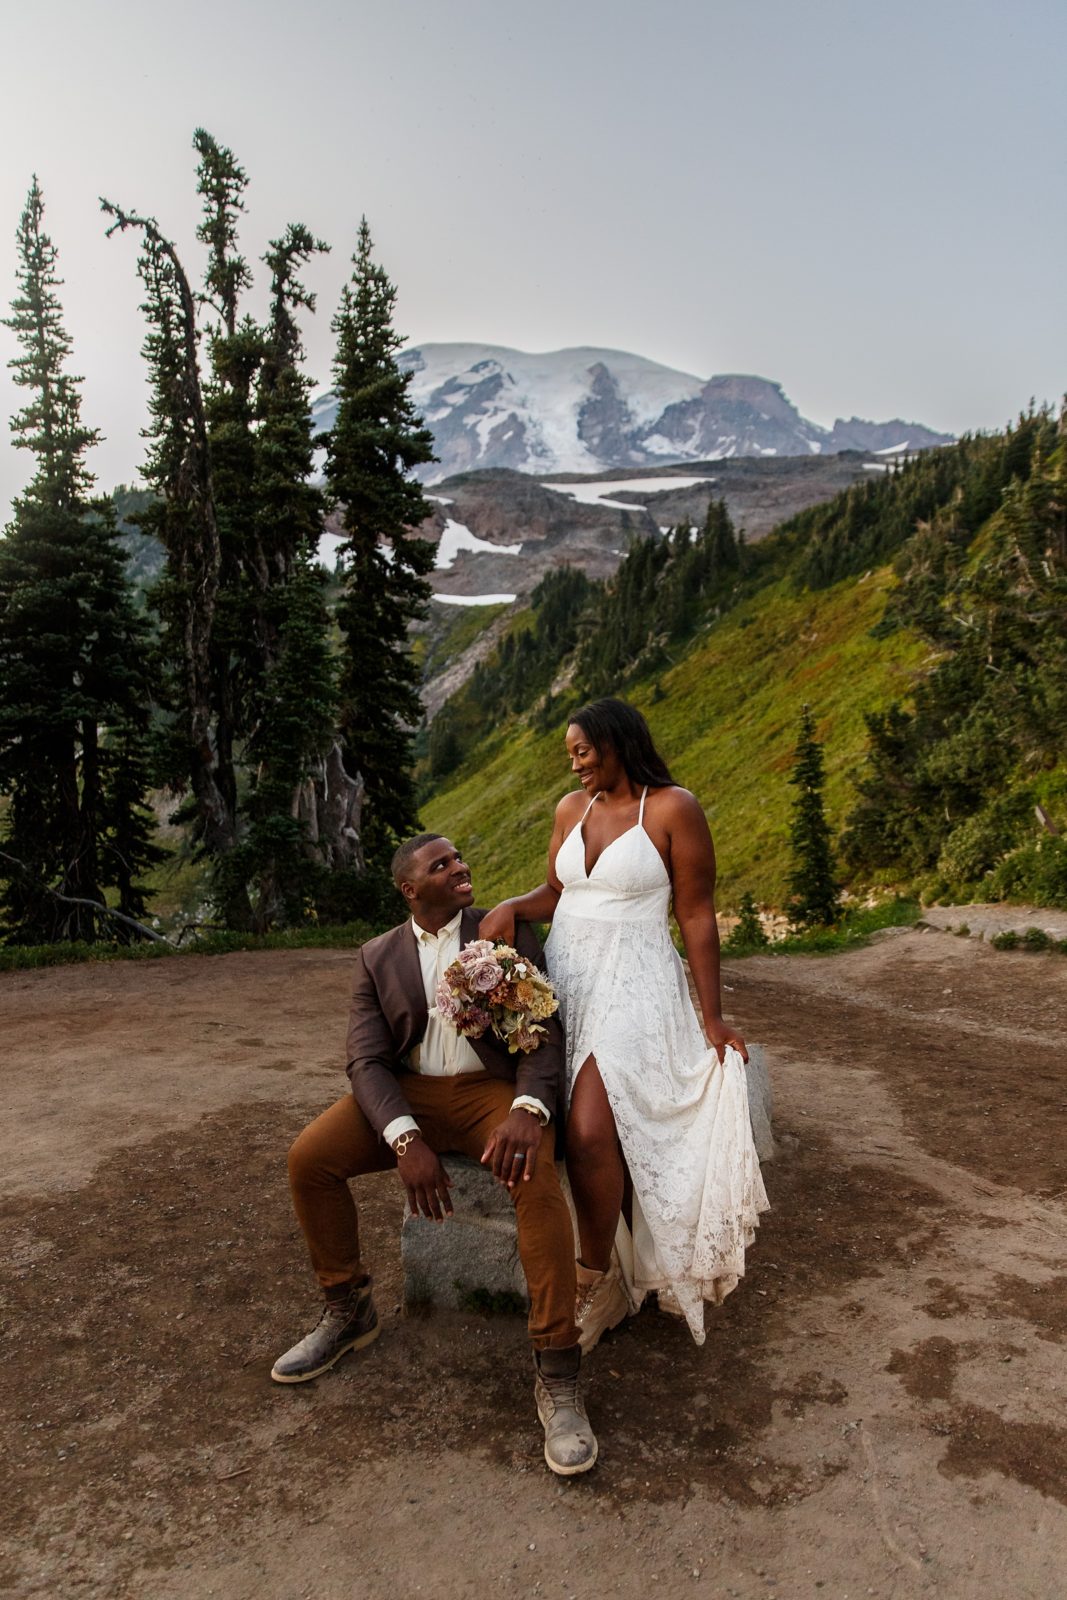 Fun couple laugh with each other during their hiking elopement adventure at Mount Rainier.